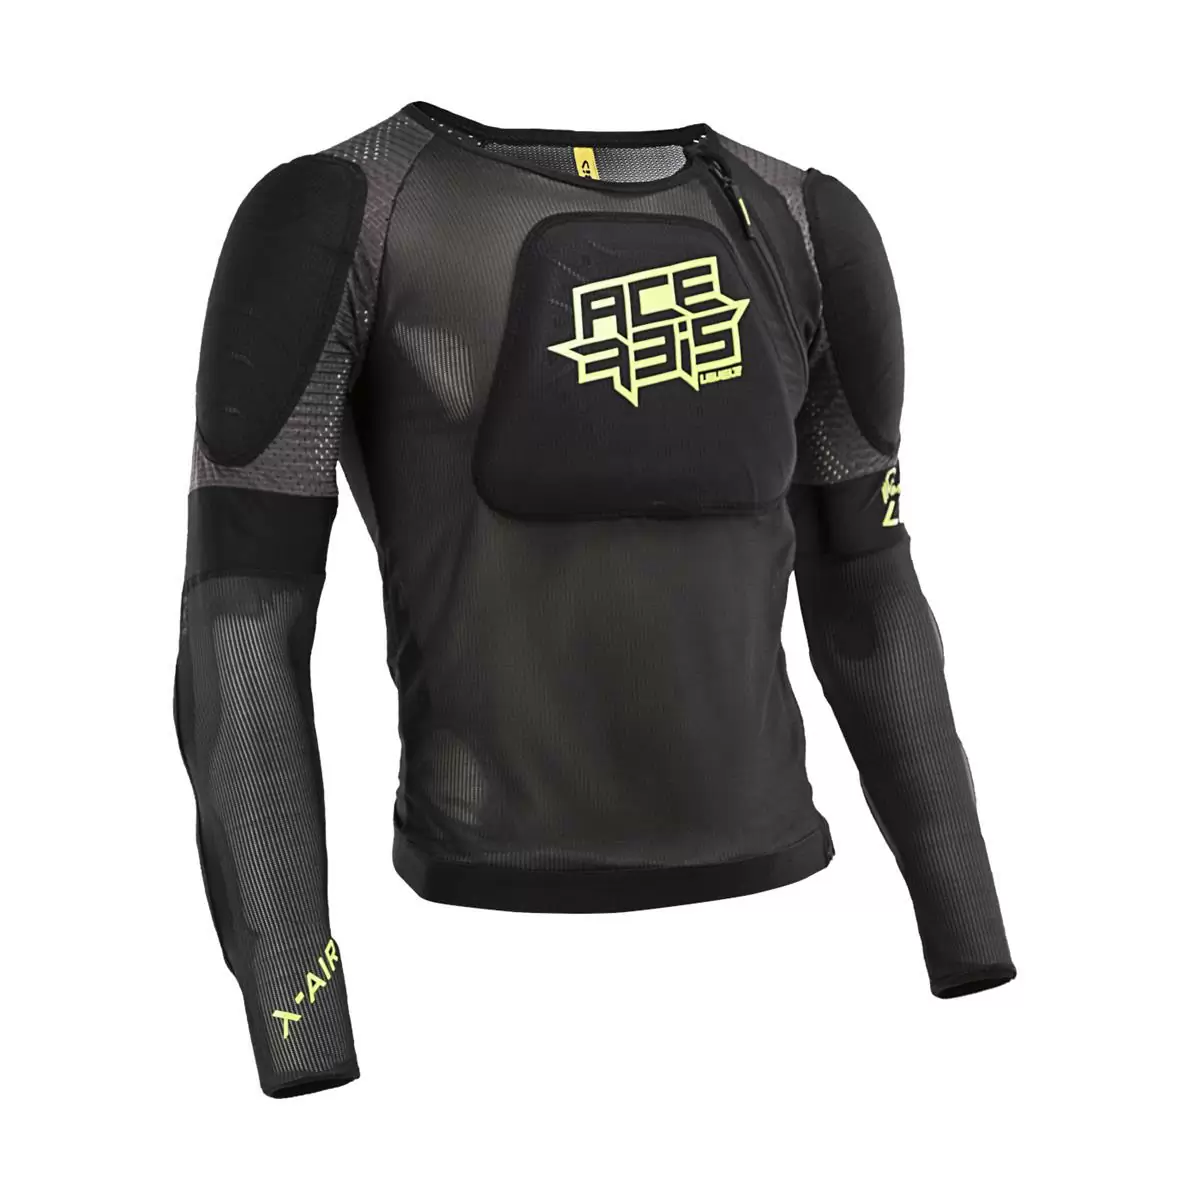 Body Armour X-Air Level 2 Black/Yellow Size S/M - image